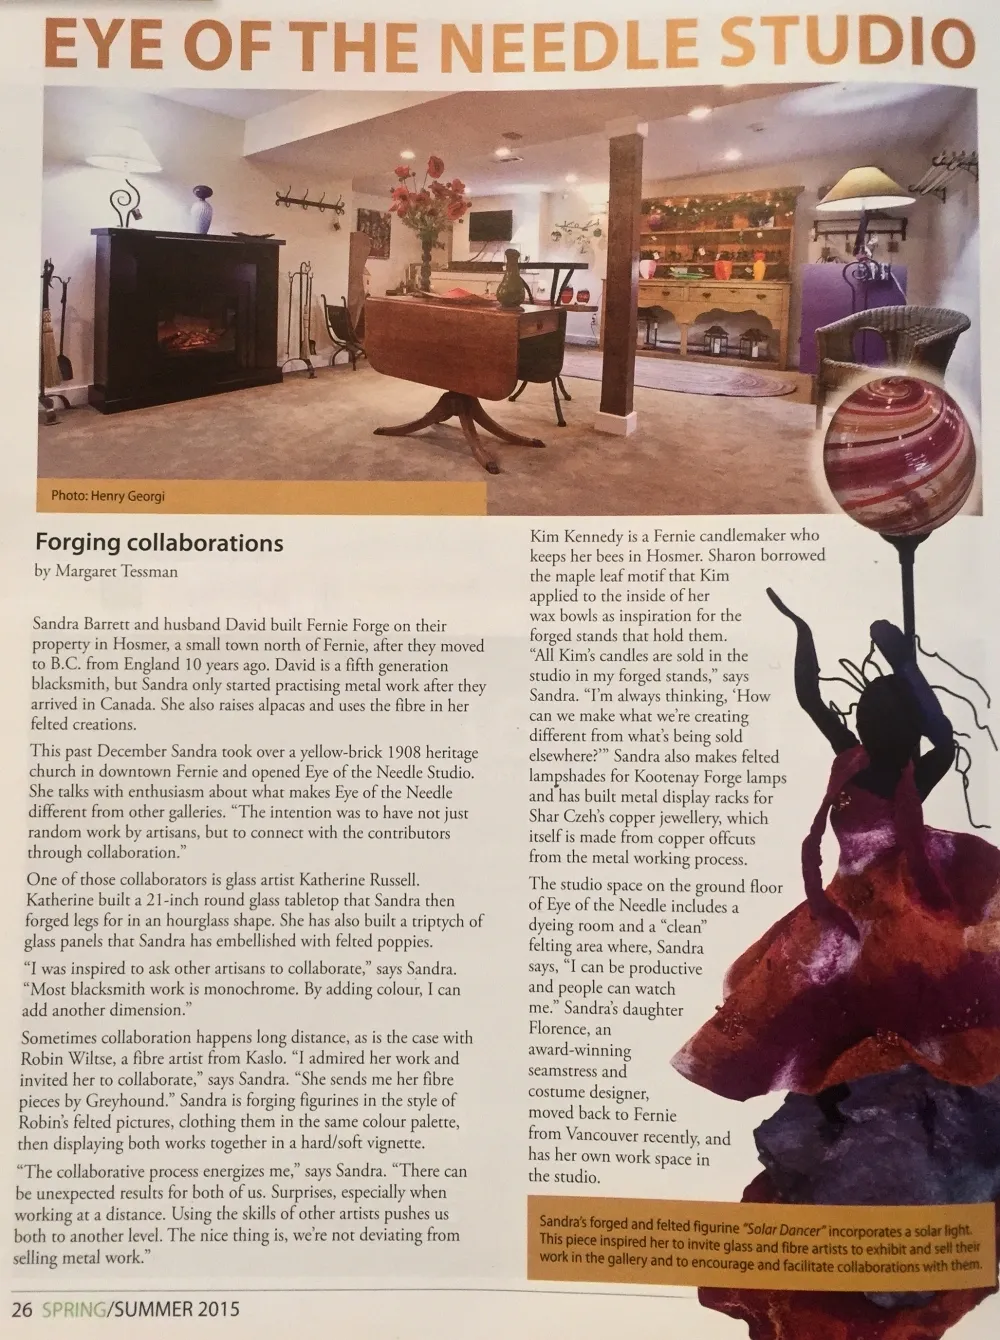 A magazine article about an old fashioned fireplace.